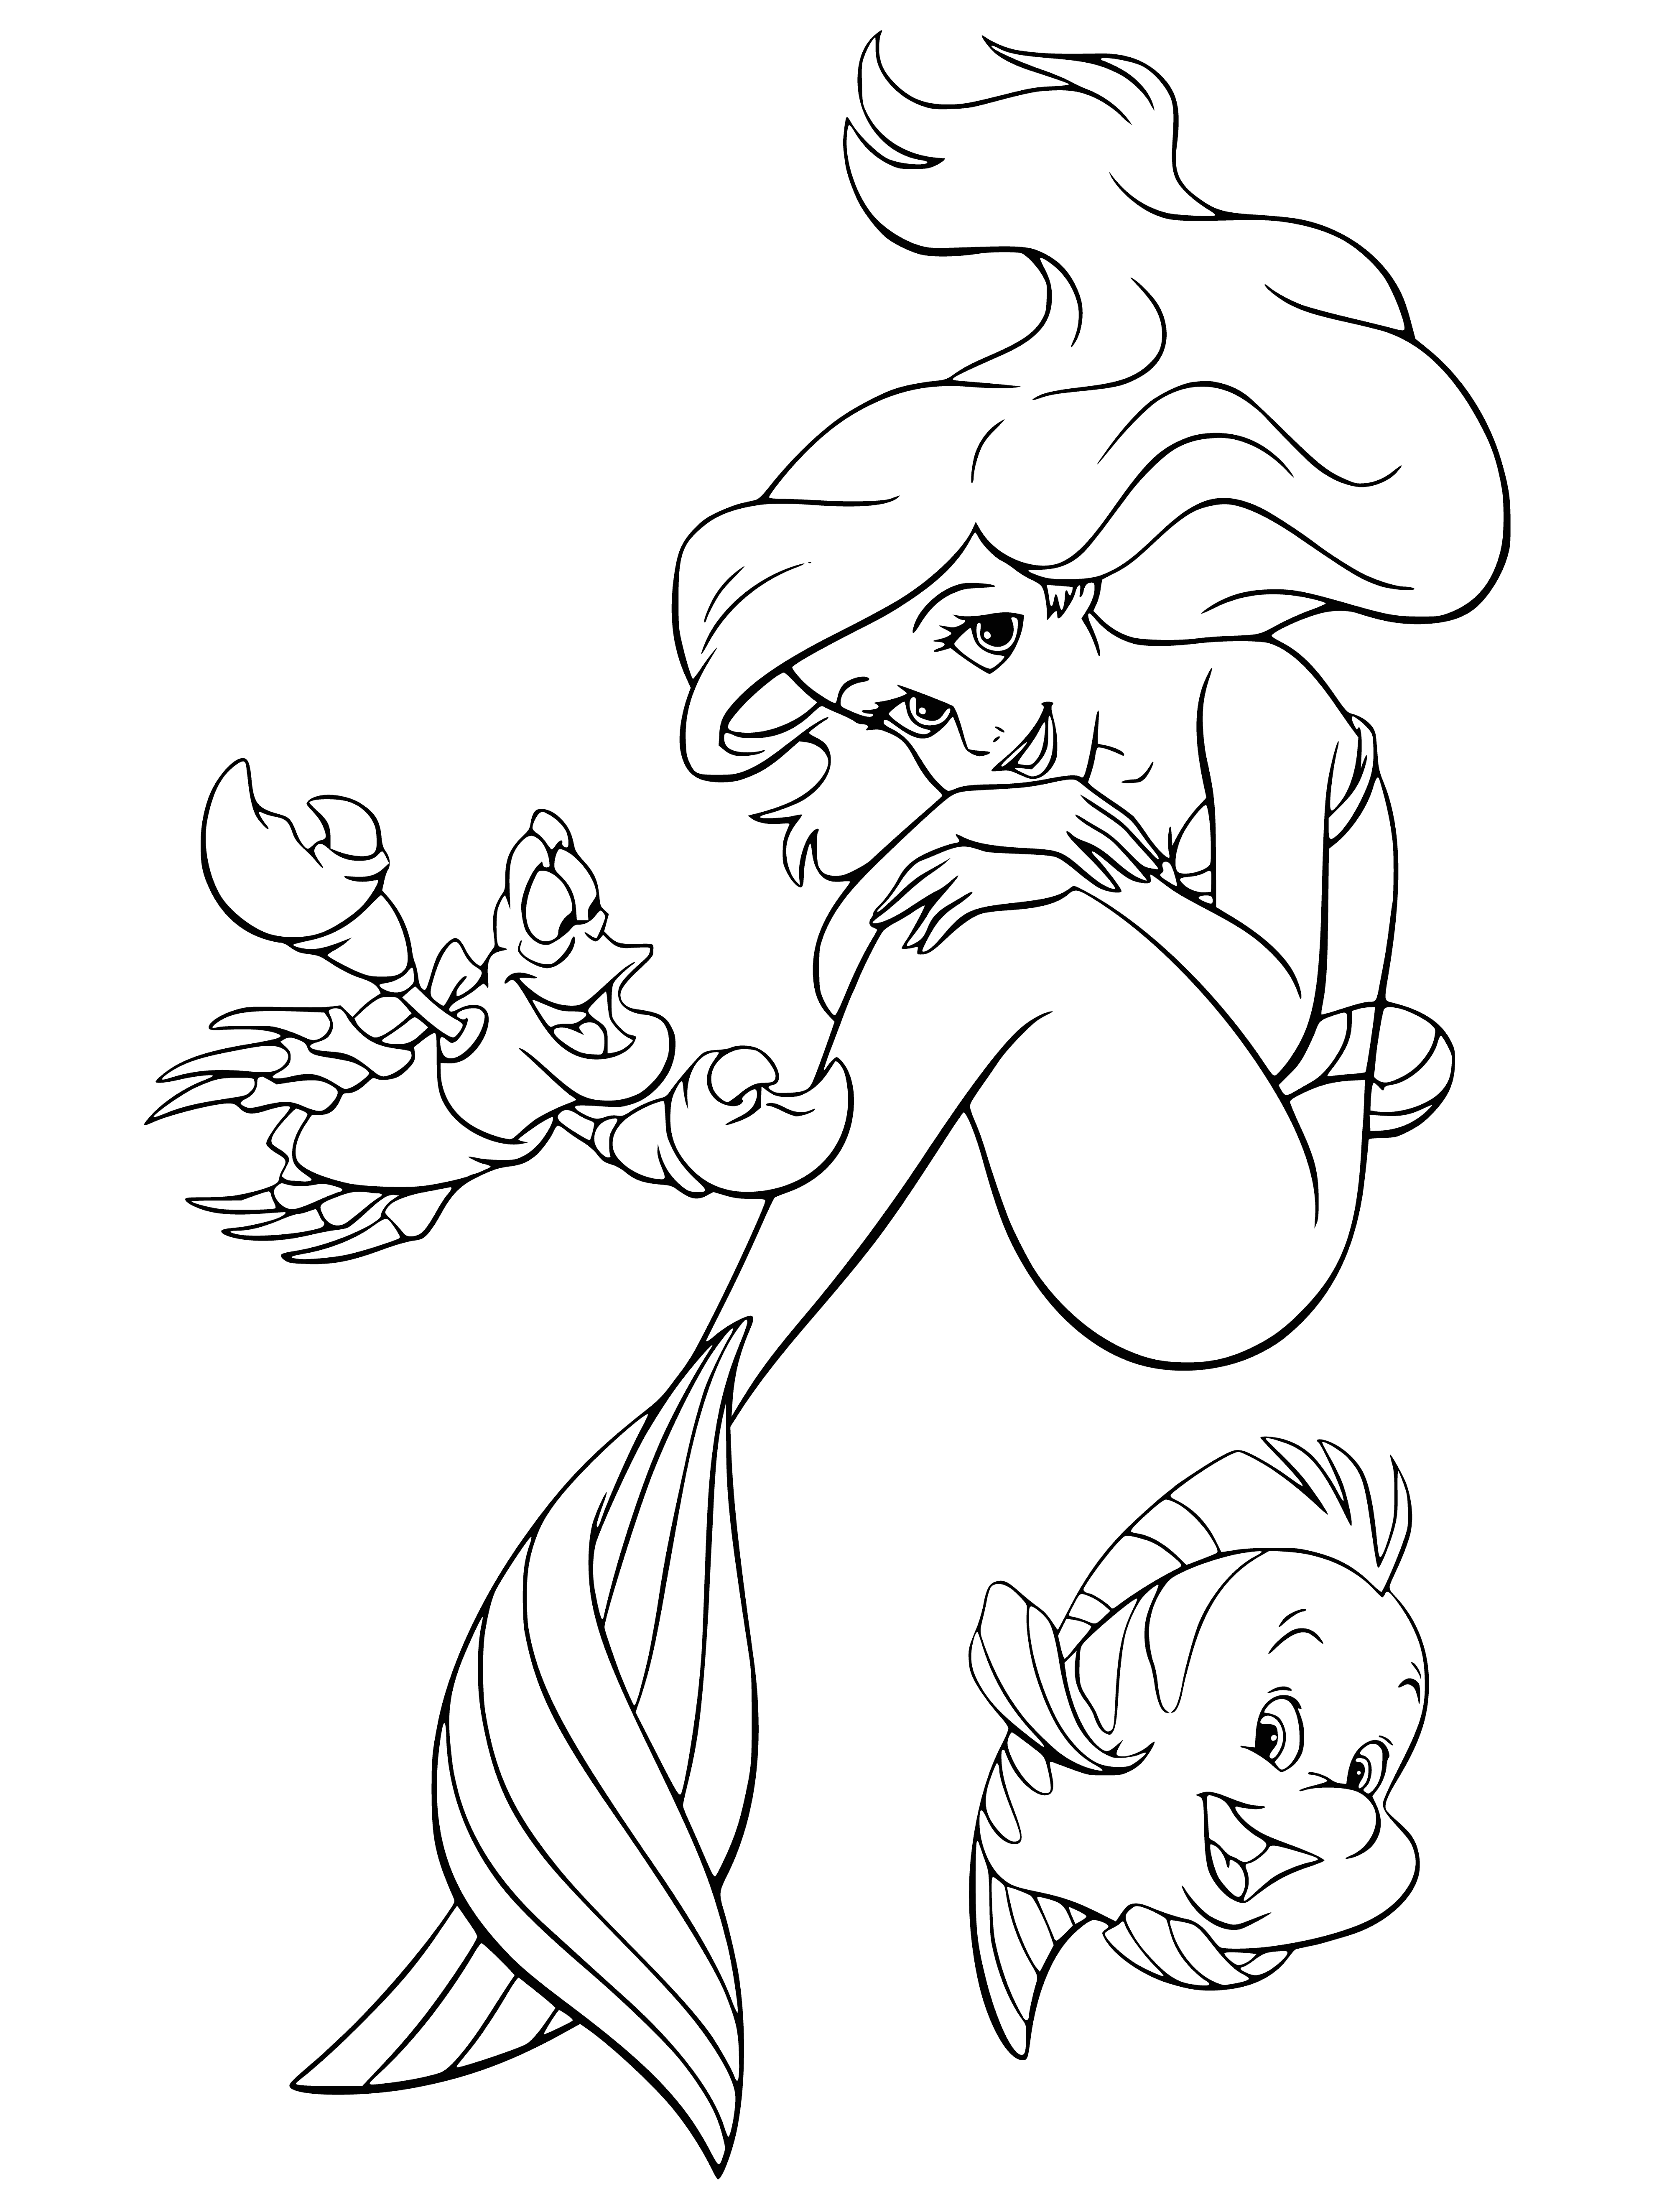 Merry Ariel coloring page